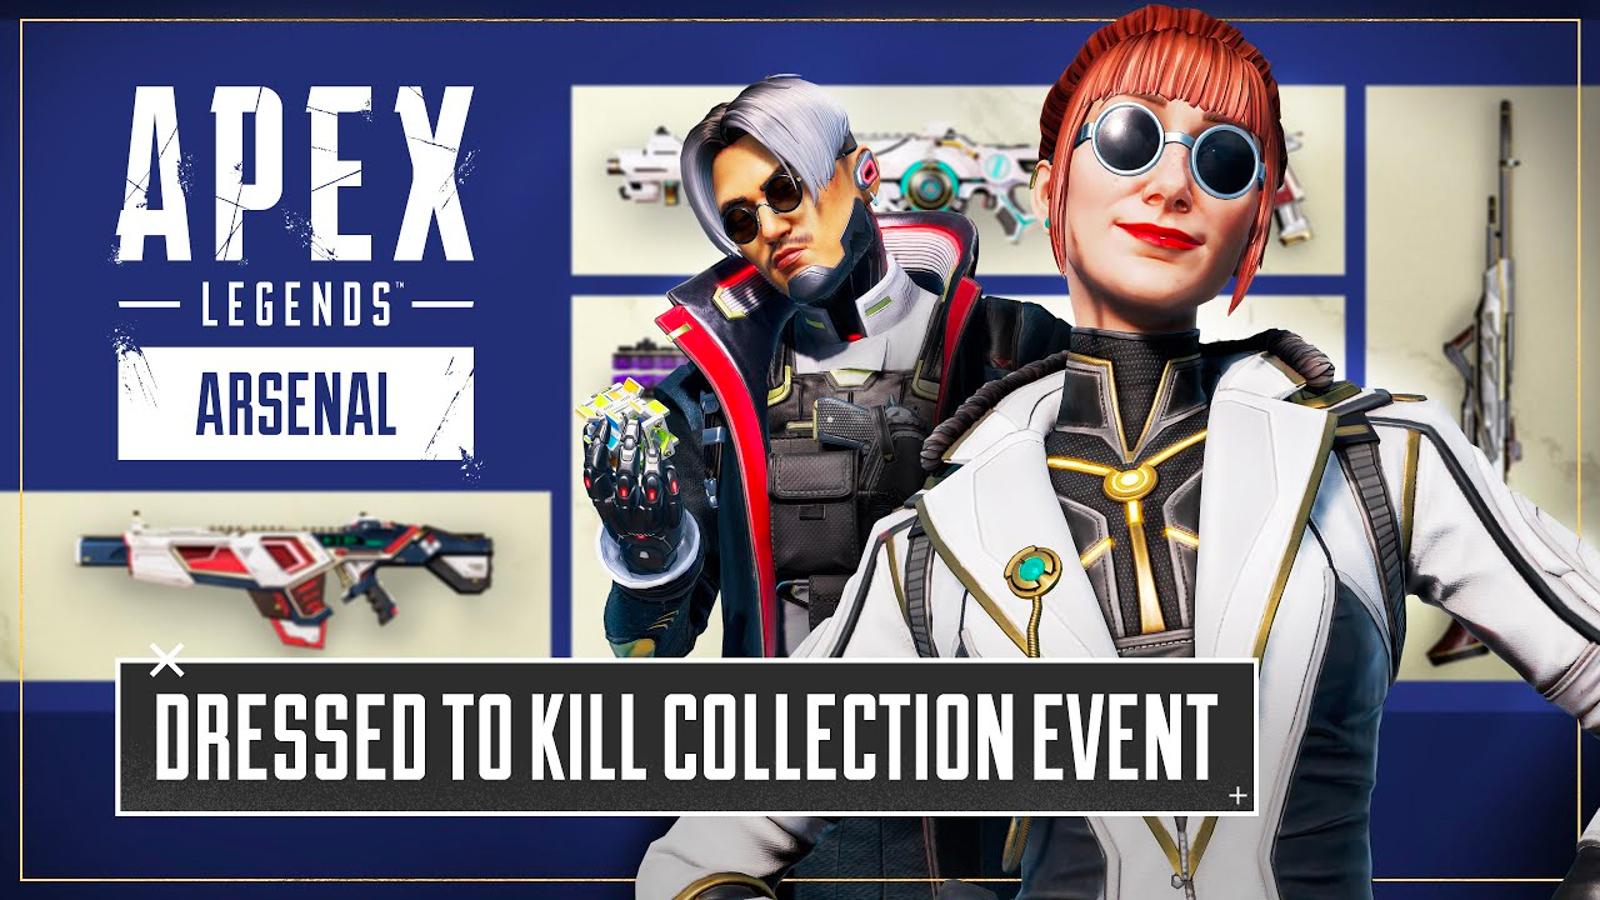 Dressed to Kill Collection Event in Apex Legends